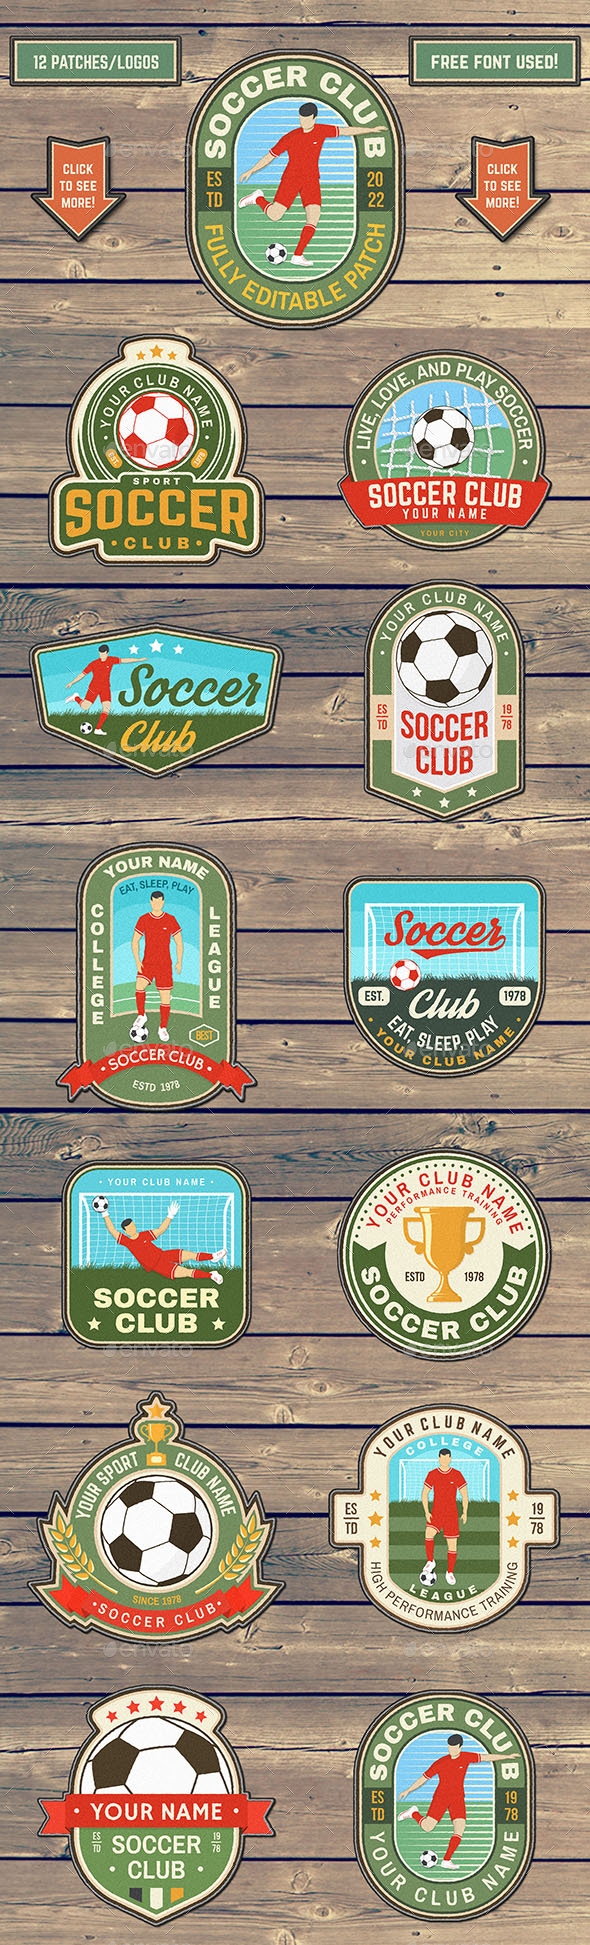 Soccer club Patches/Logos